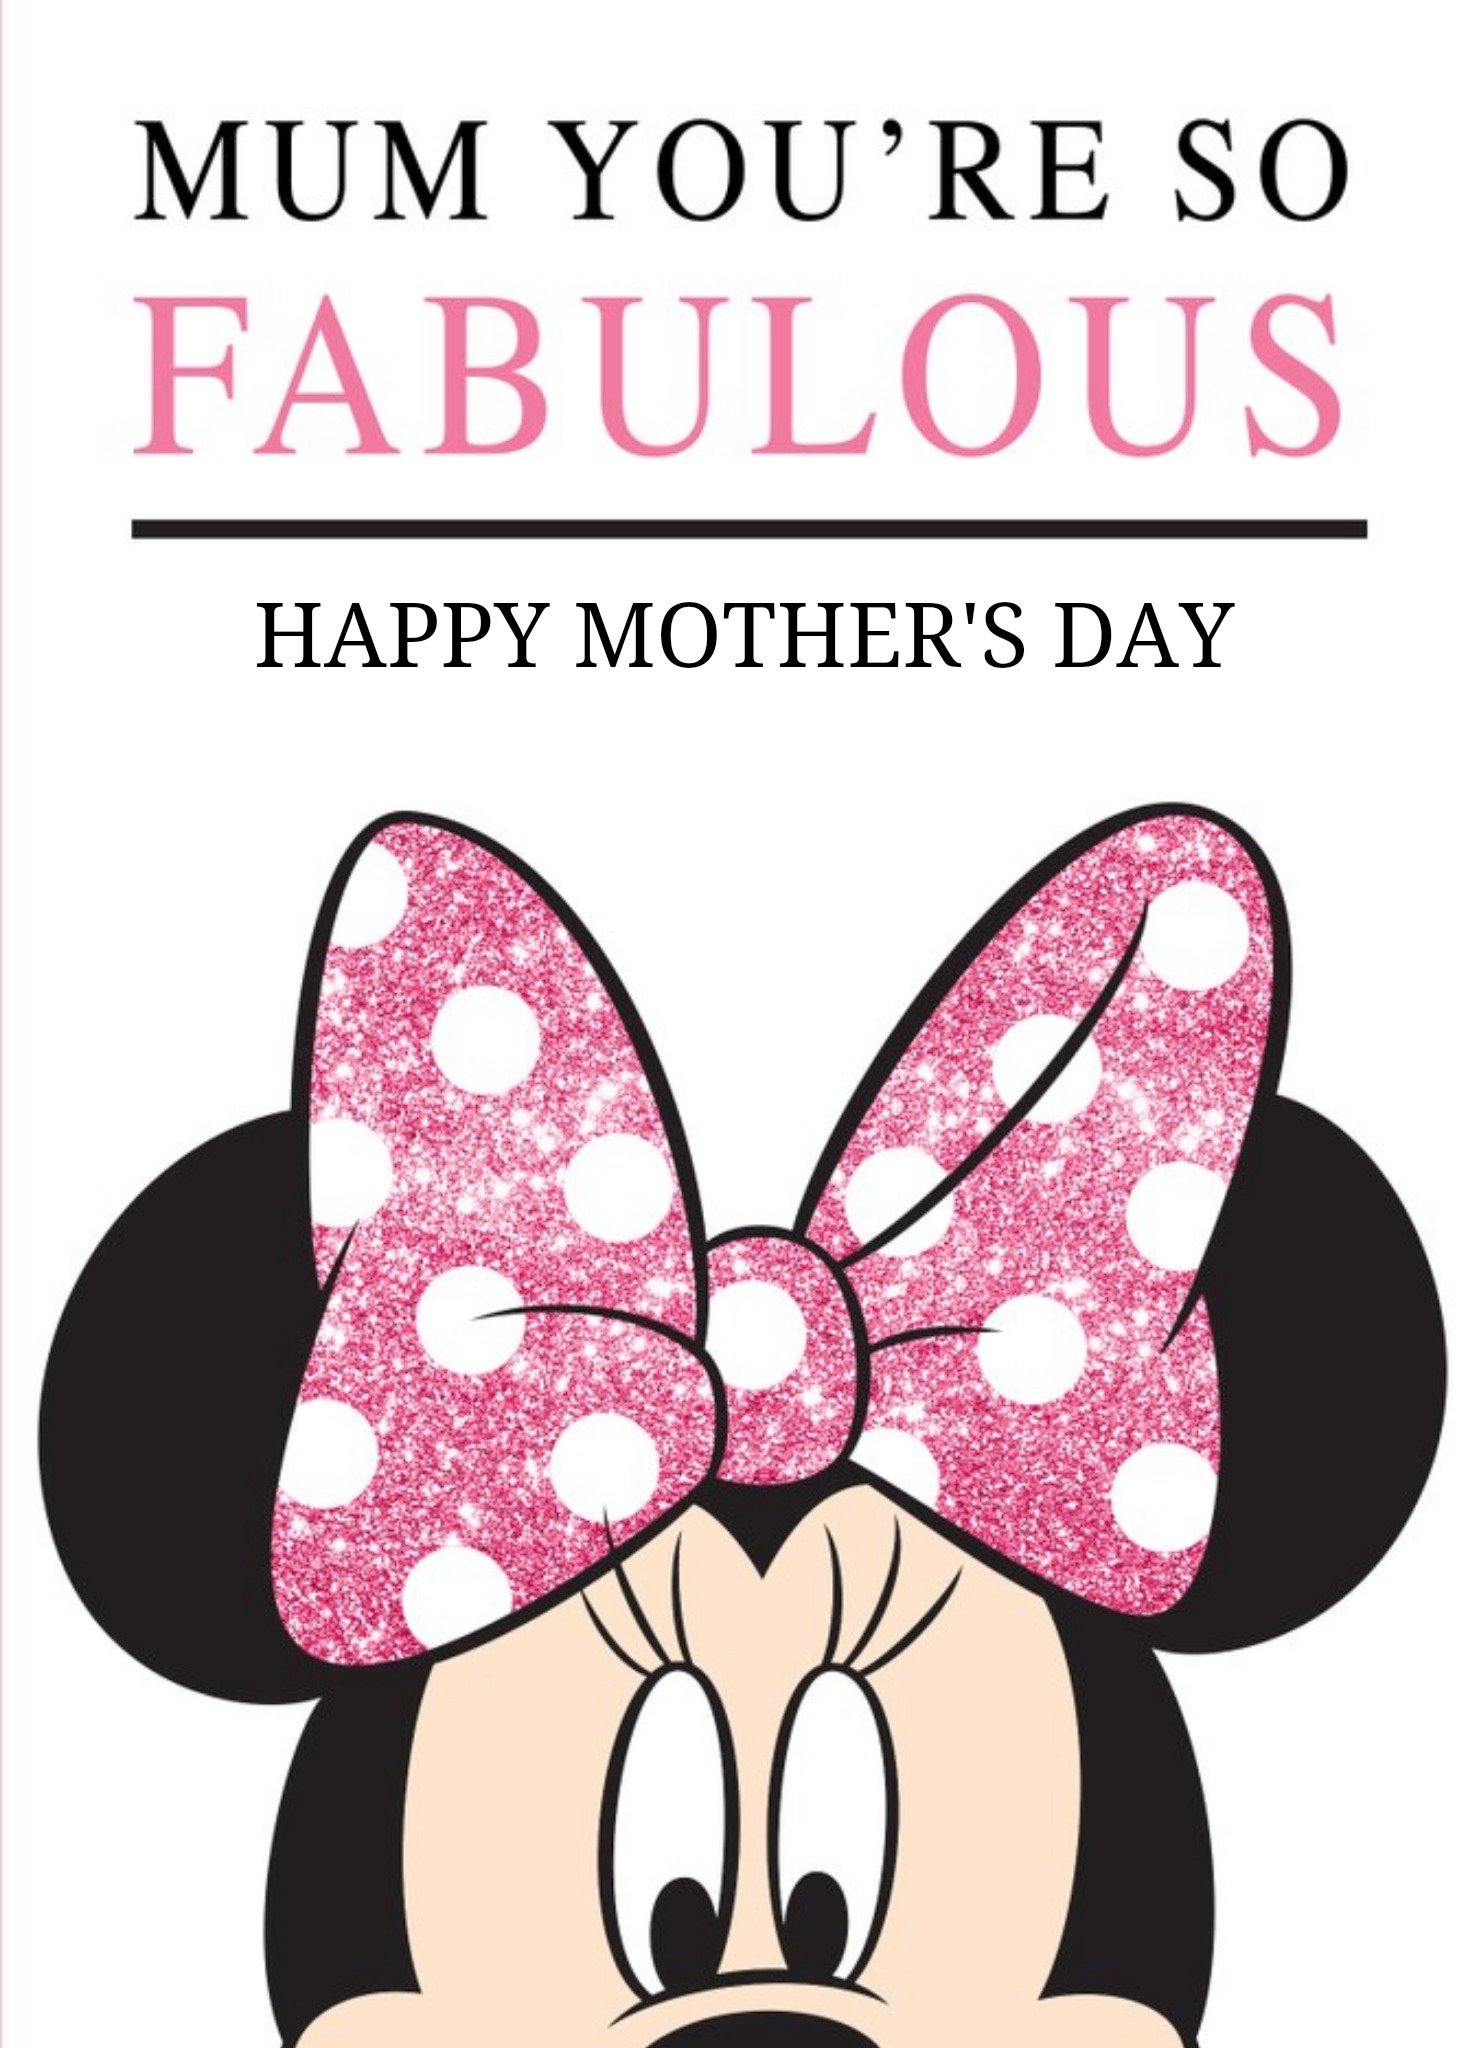 Disney Minnie Mouse Mum You're Fabulous Happy Mother's Day Card, Large